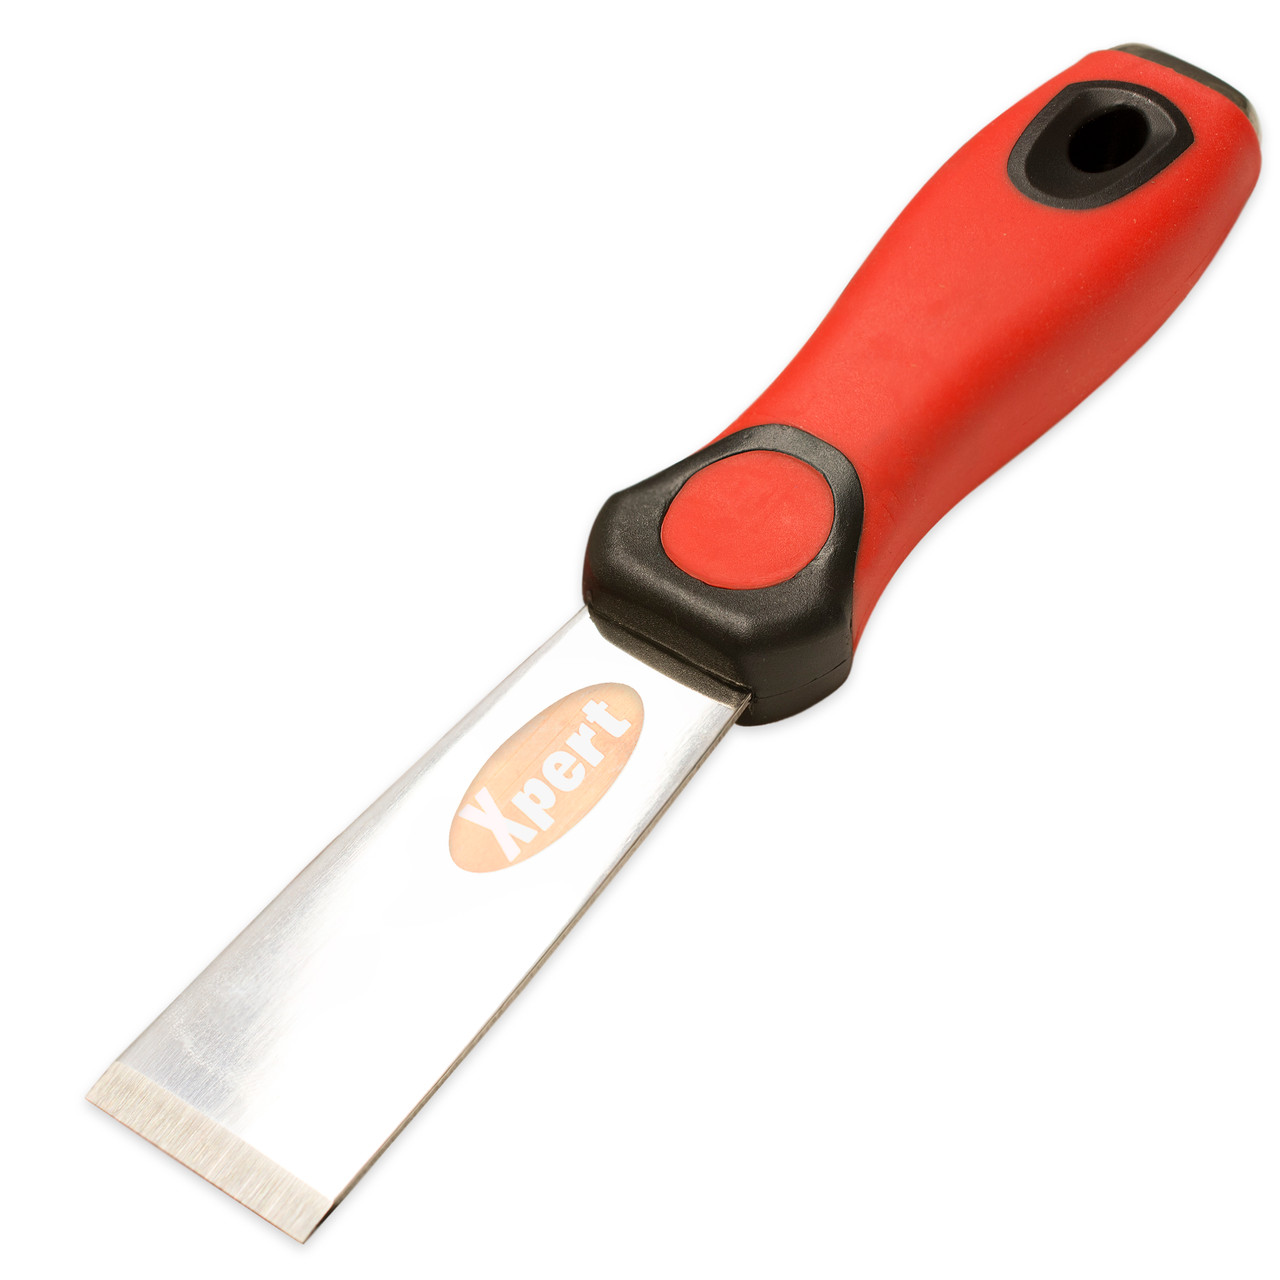 Xpert 32mm Chisel Knife  Xpert Hand Tools for the Fenestration Industry